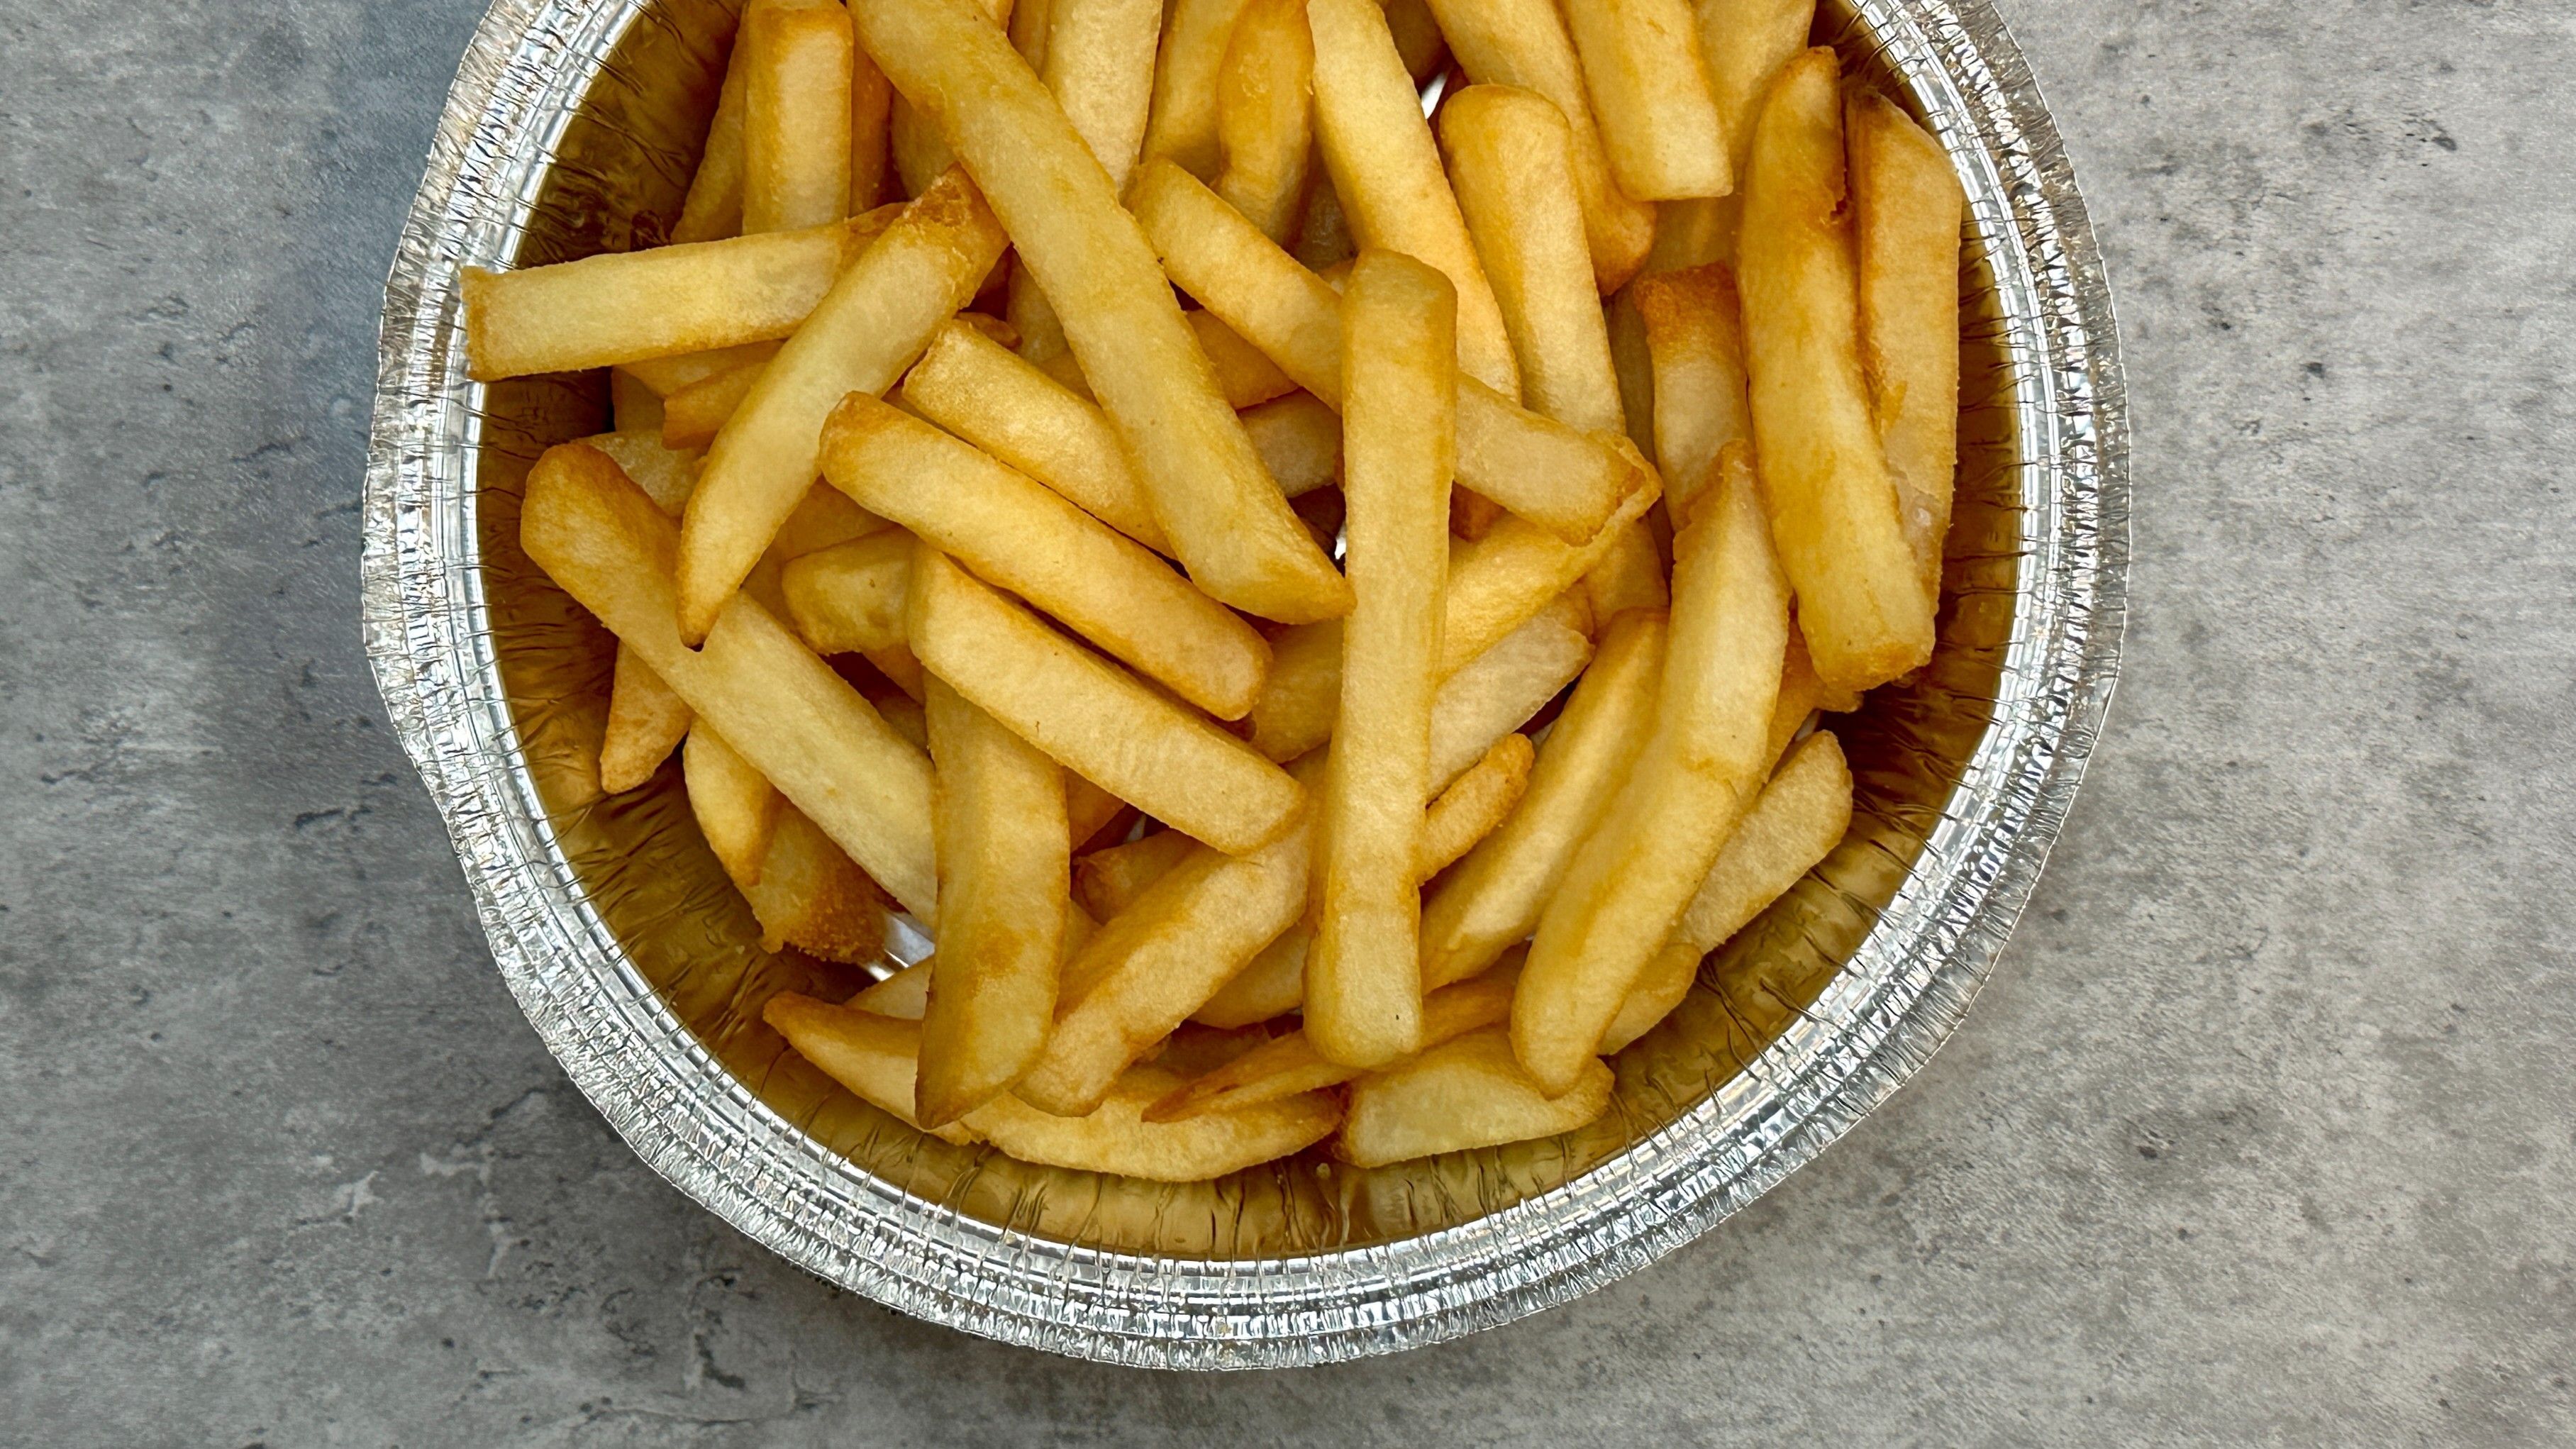 Side of French Fries